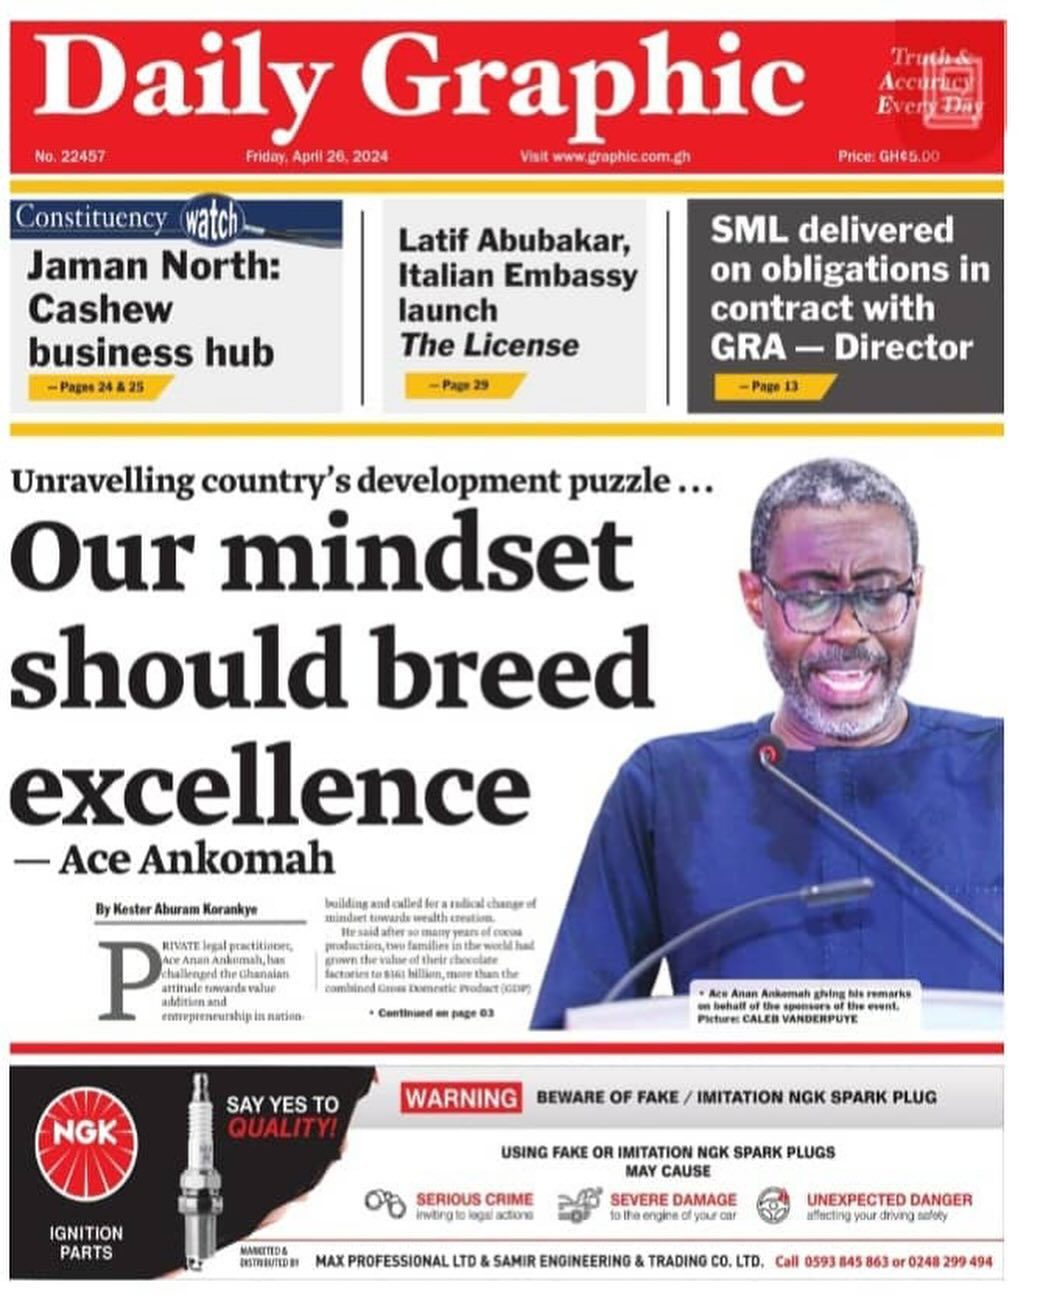 Daily Graphic Newspaper - April 26, 2024